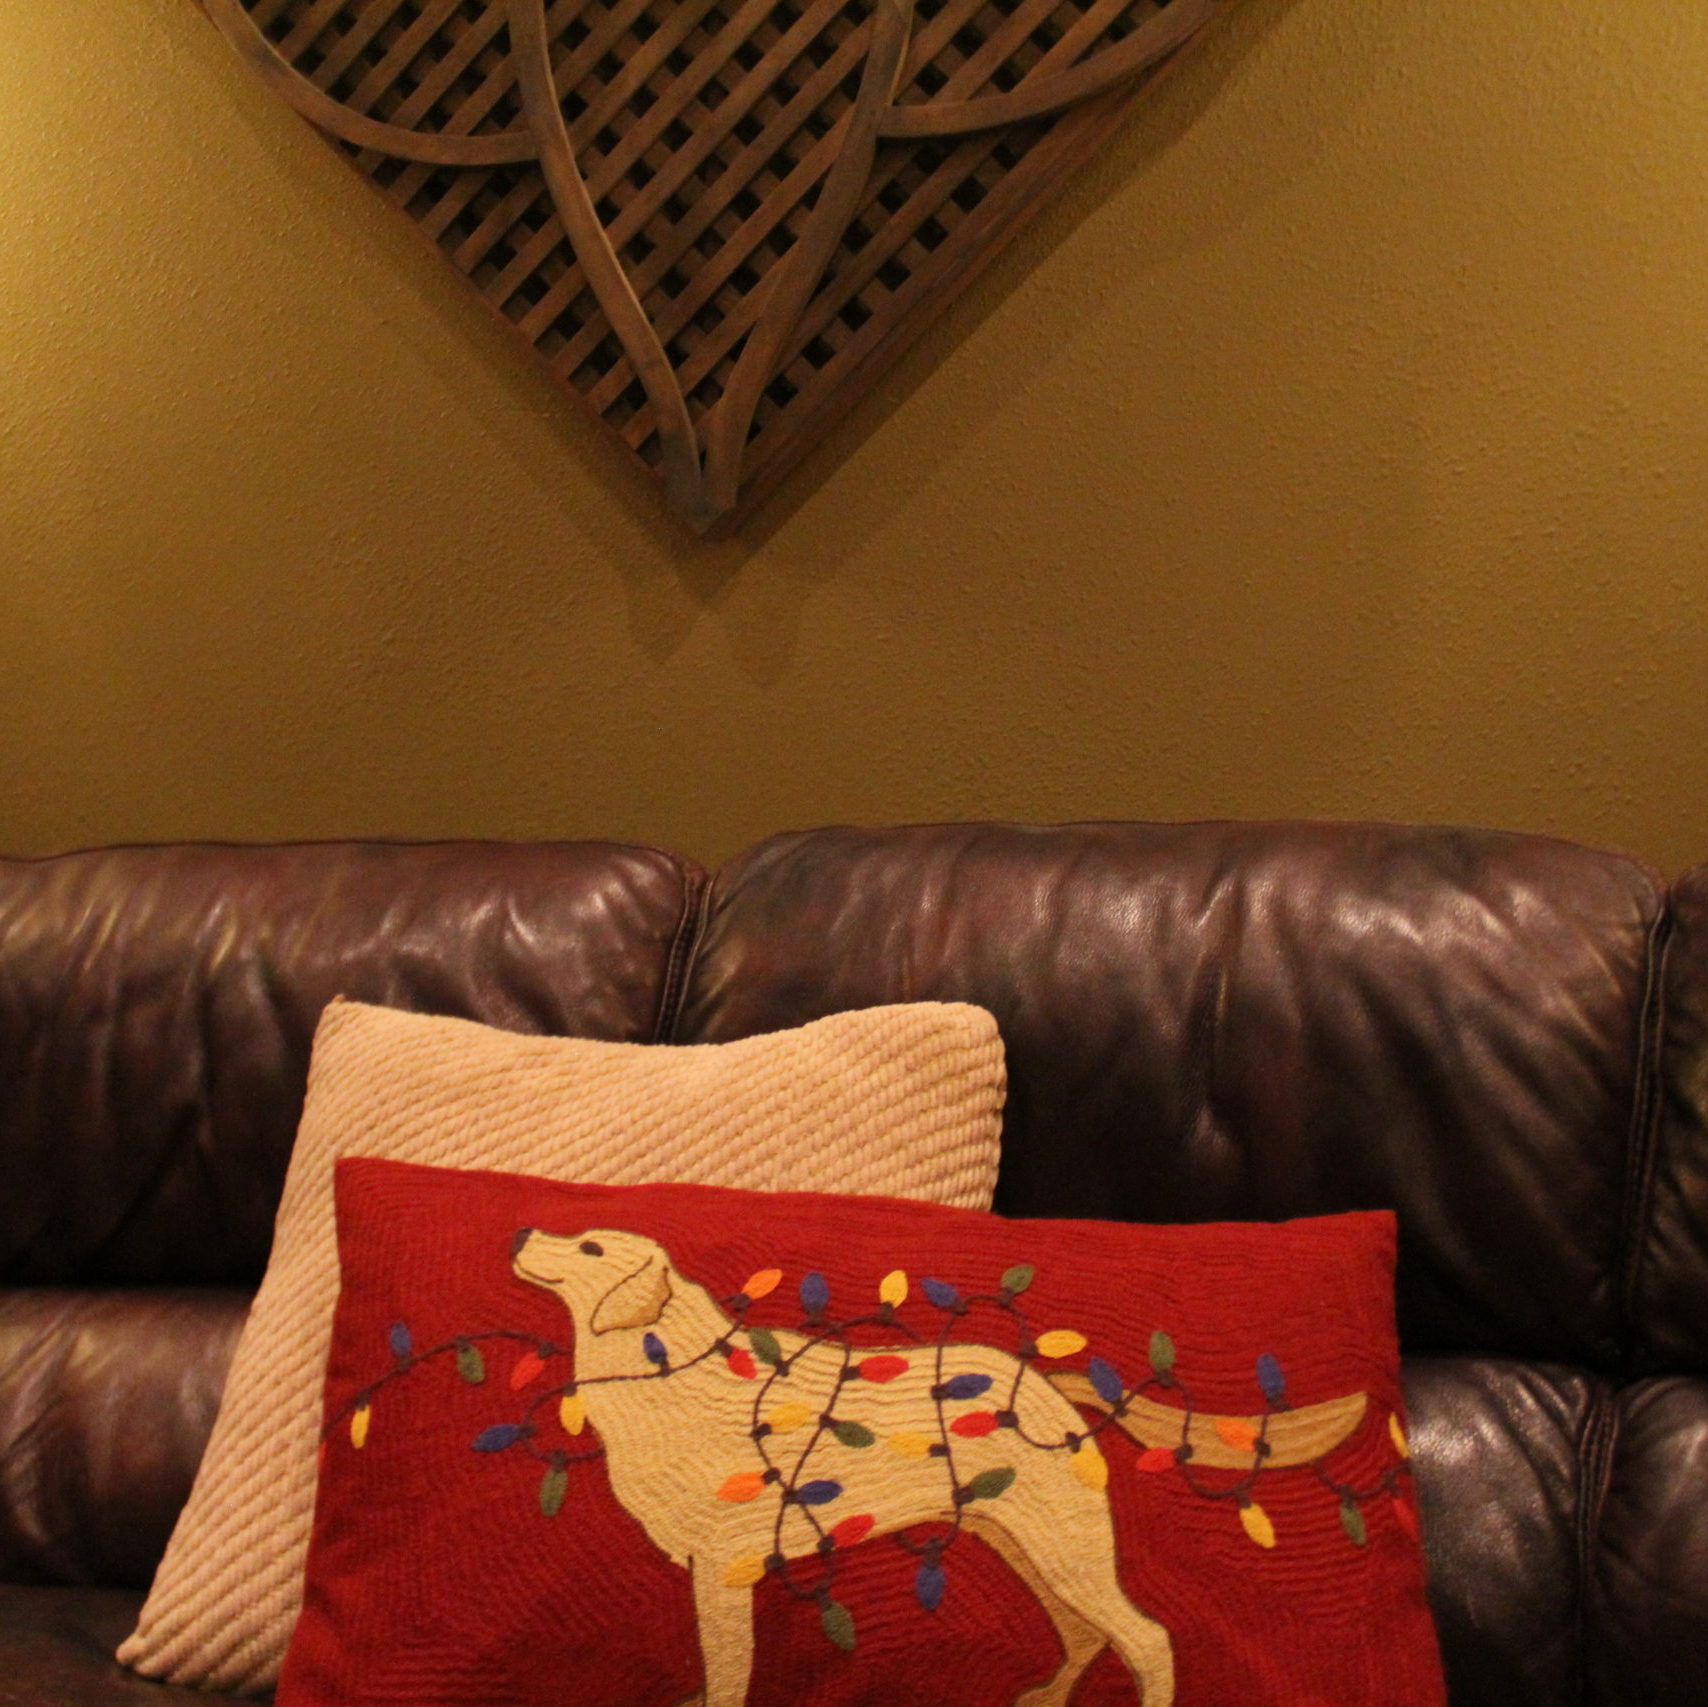 My Tess pillow cover! I love the Pottery Barn pillow covers. Just change them out seasonally.